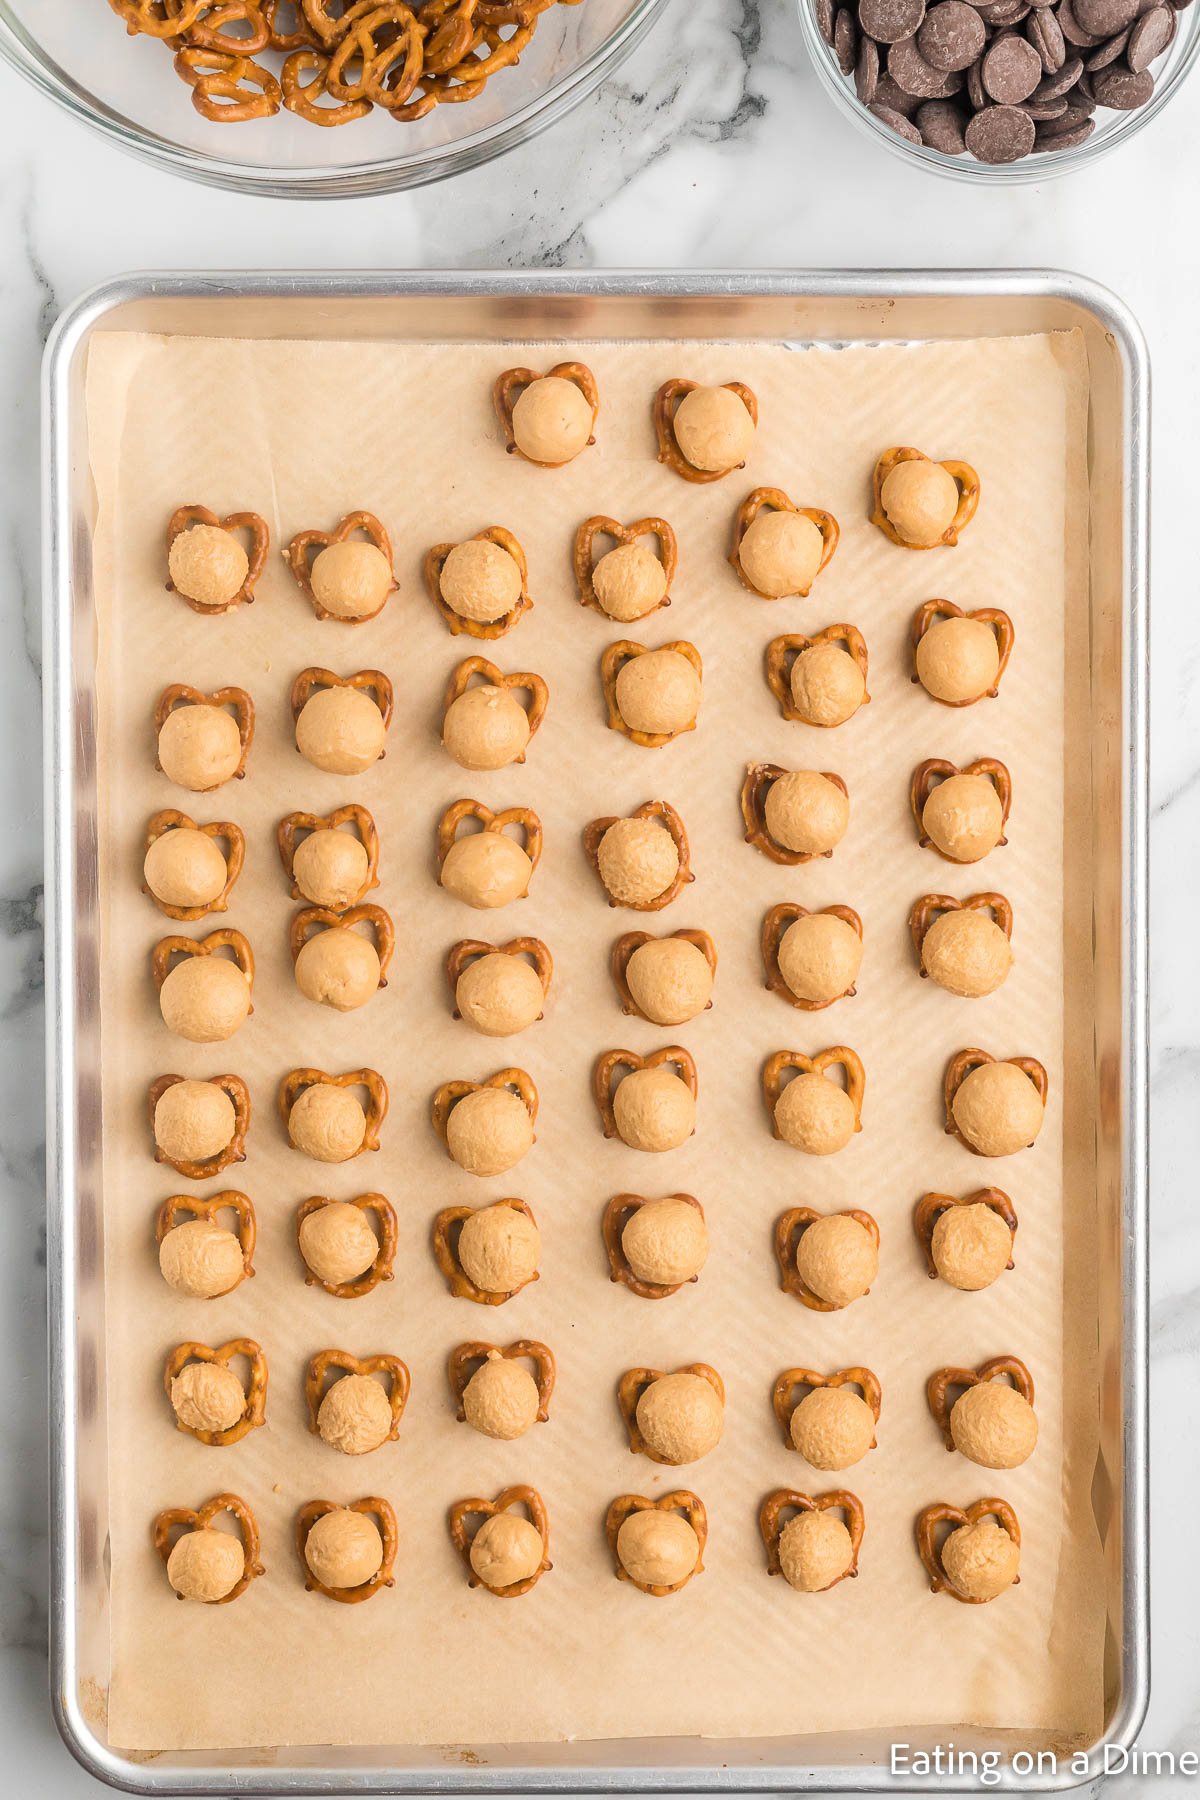 Topping the pretzels on the baking sheet with a peanut butter ball